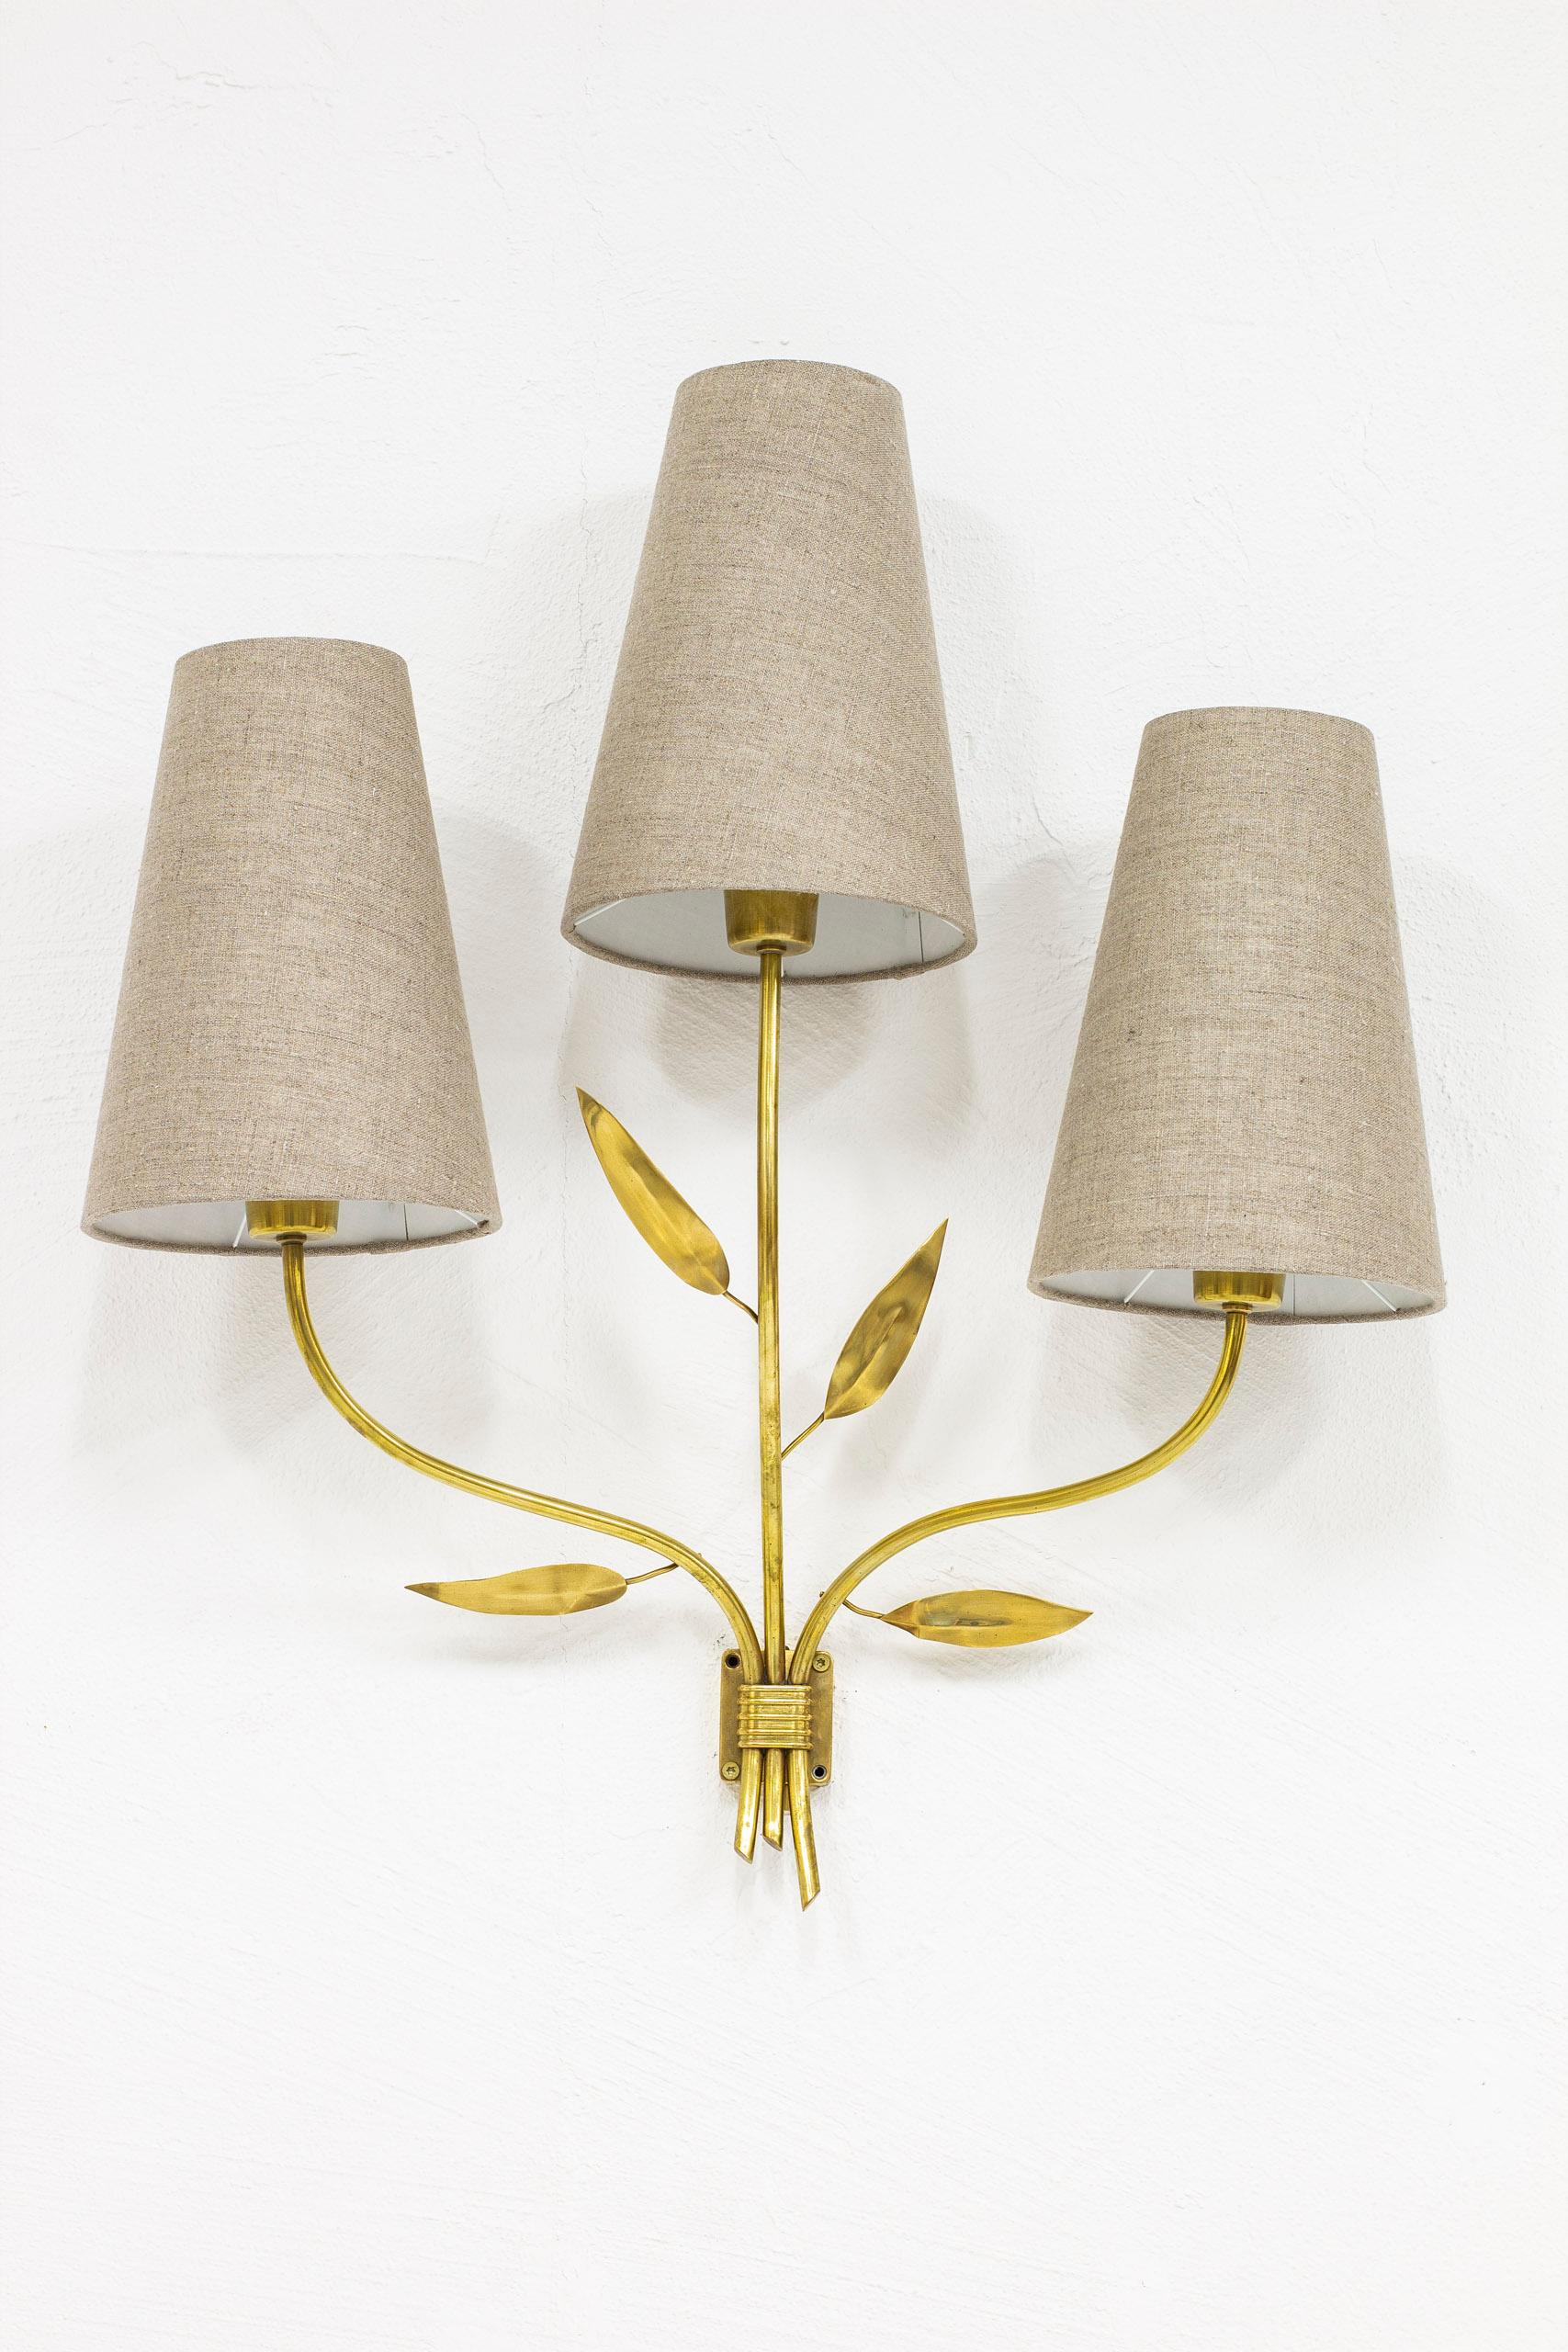 Mid-20th Century Large 1940s Swedish Modern Wall Lamps in Brass and Linen